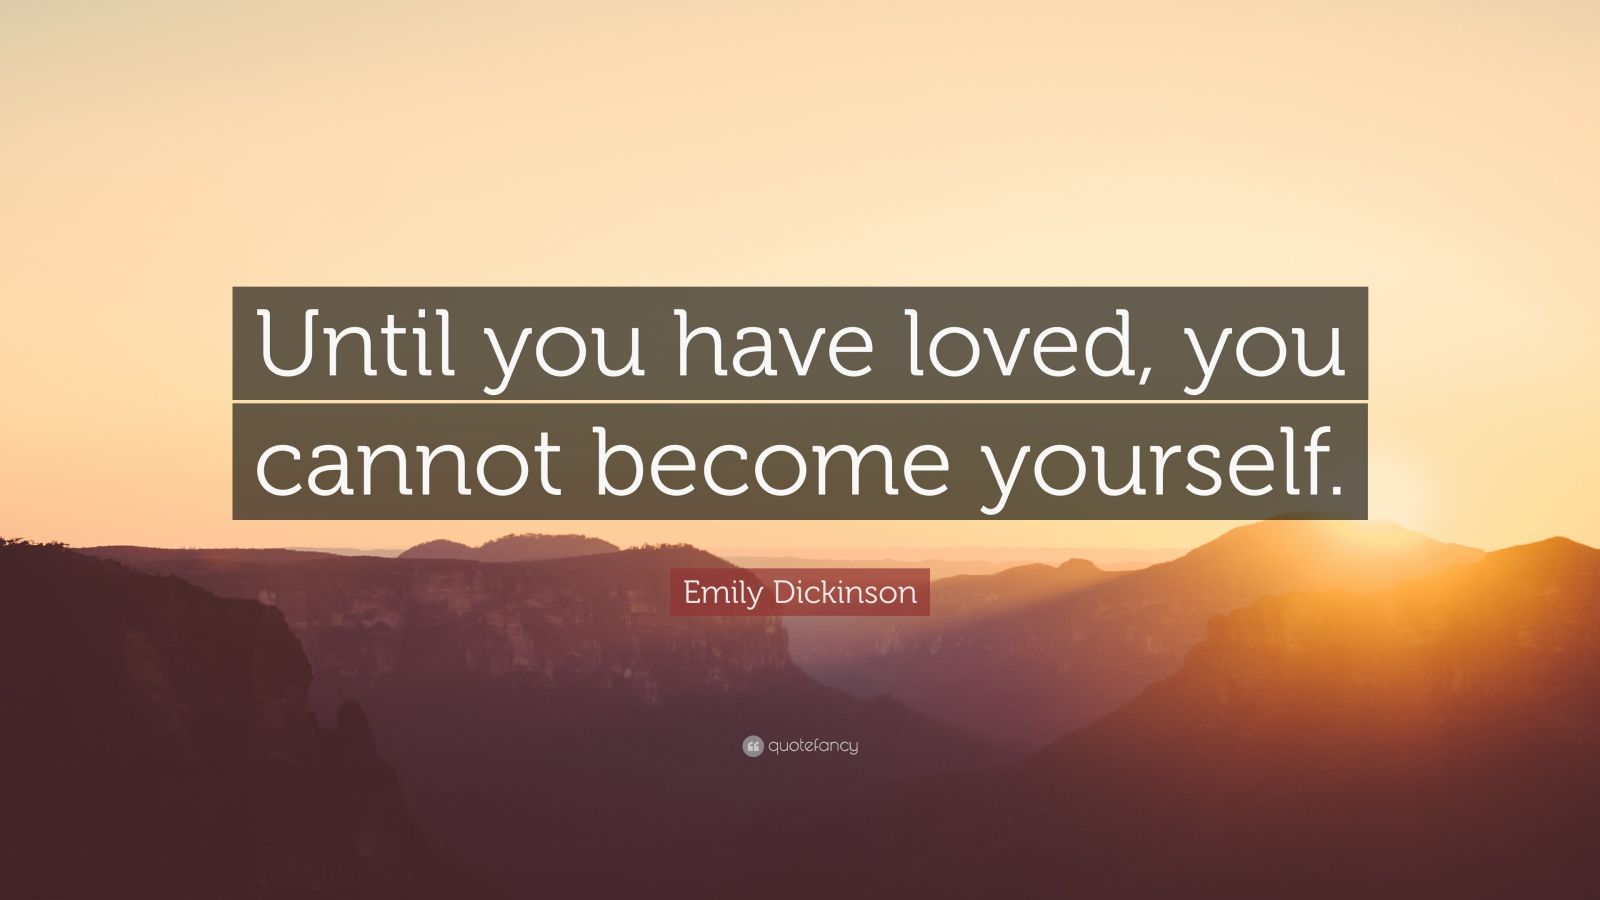 Emily Dickinson Quotes (100 wallpapers) - Quotefancy